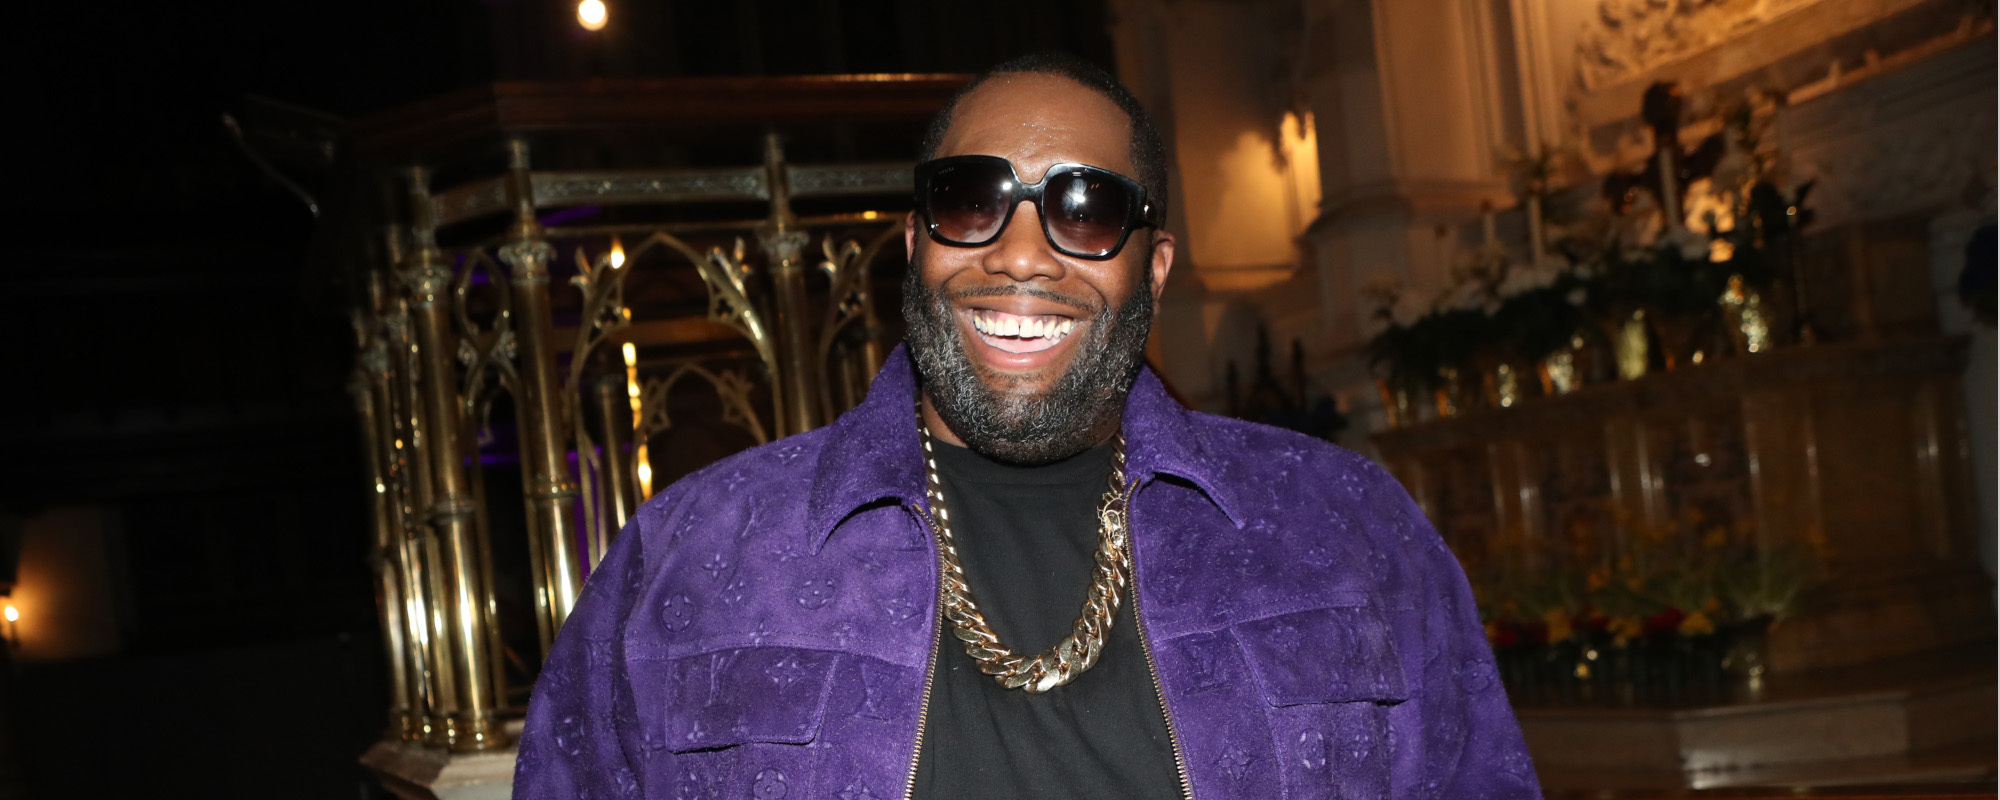 Killer Mike Releases New Single with André 3000 and Future